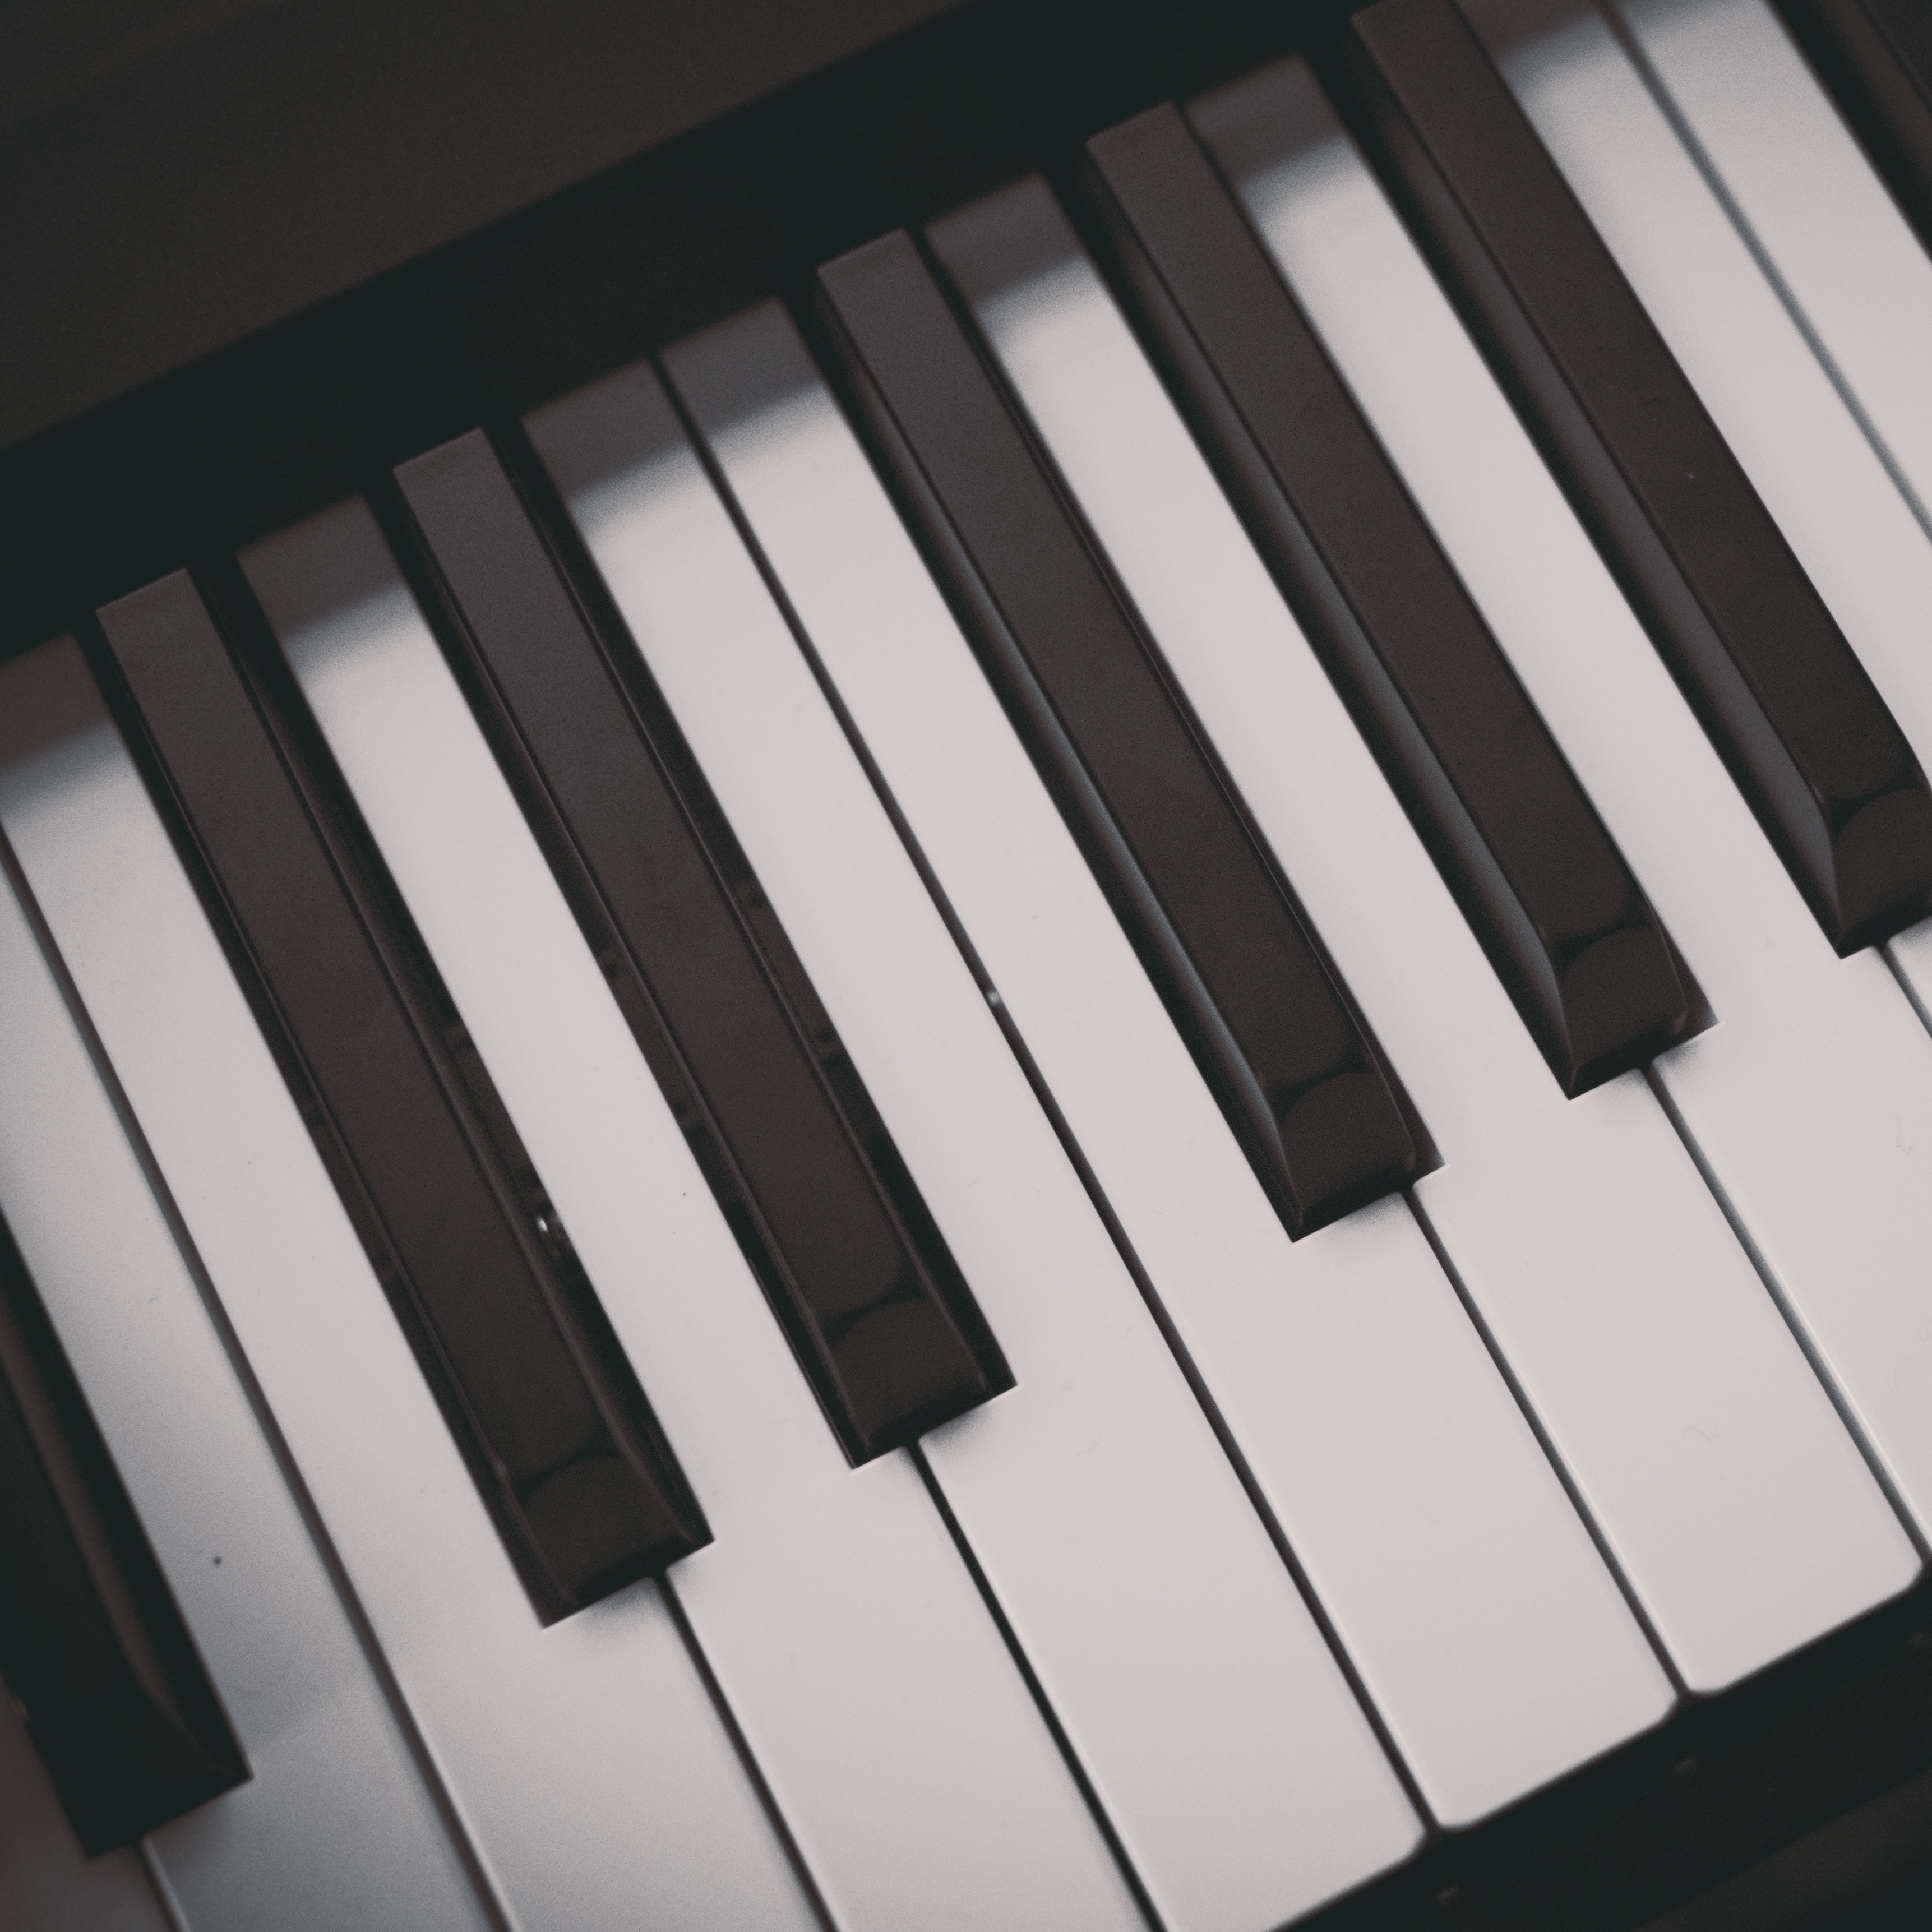 Piano Stress Relief Sessions - 20 Tracks to De-Stress and Relax